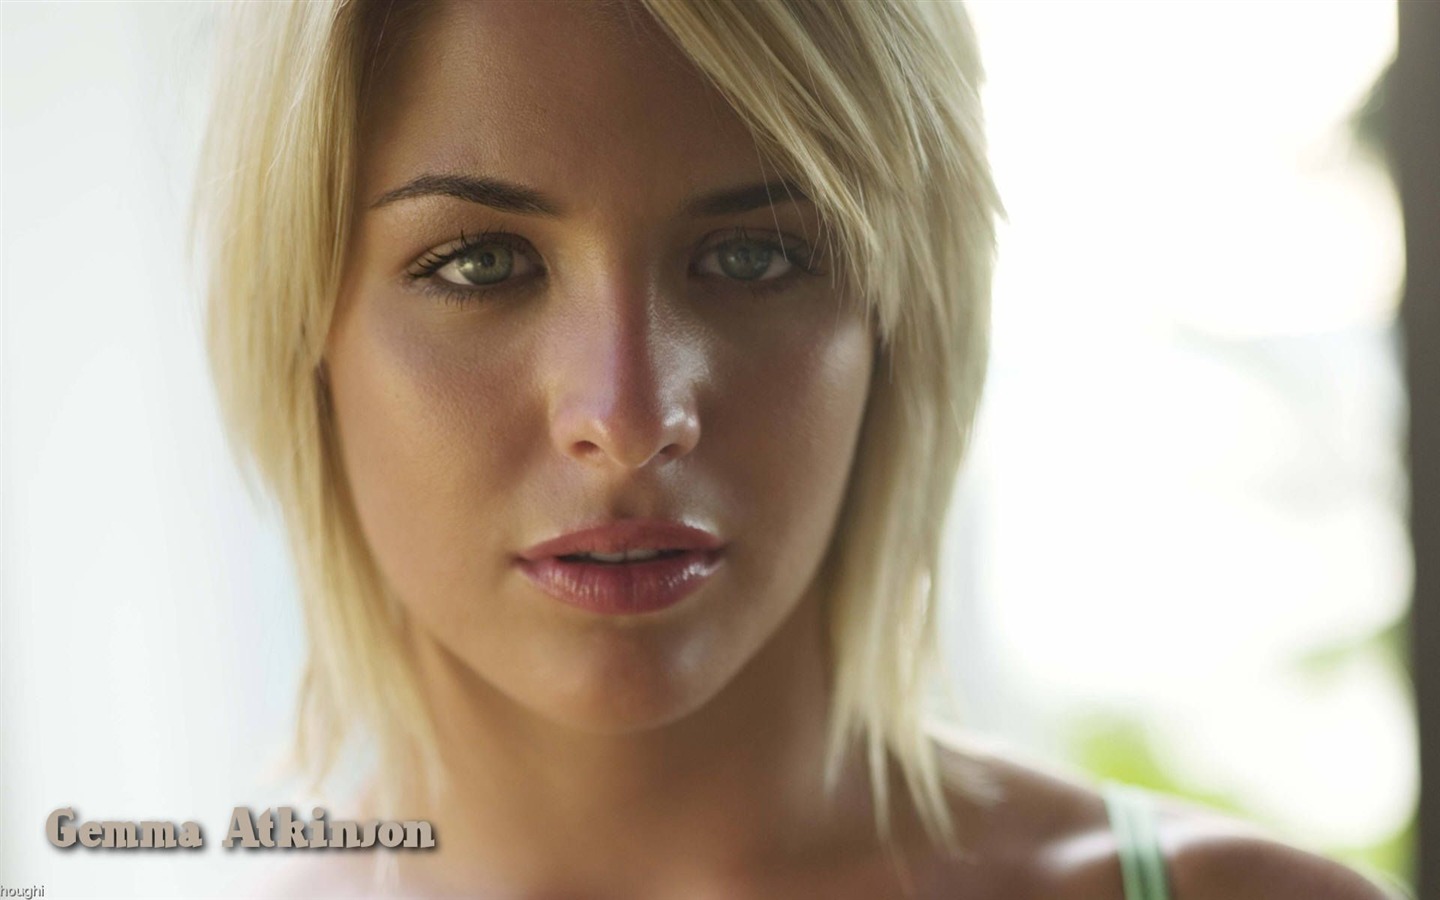 Gemma Atkinson #022 - 1440x900 Wallpapers Pictures Photos Images